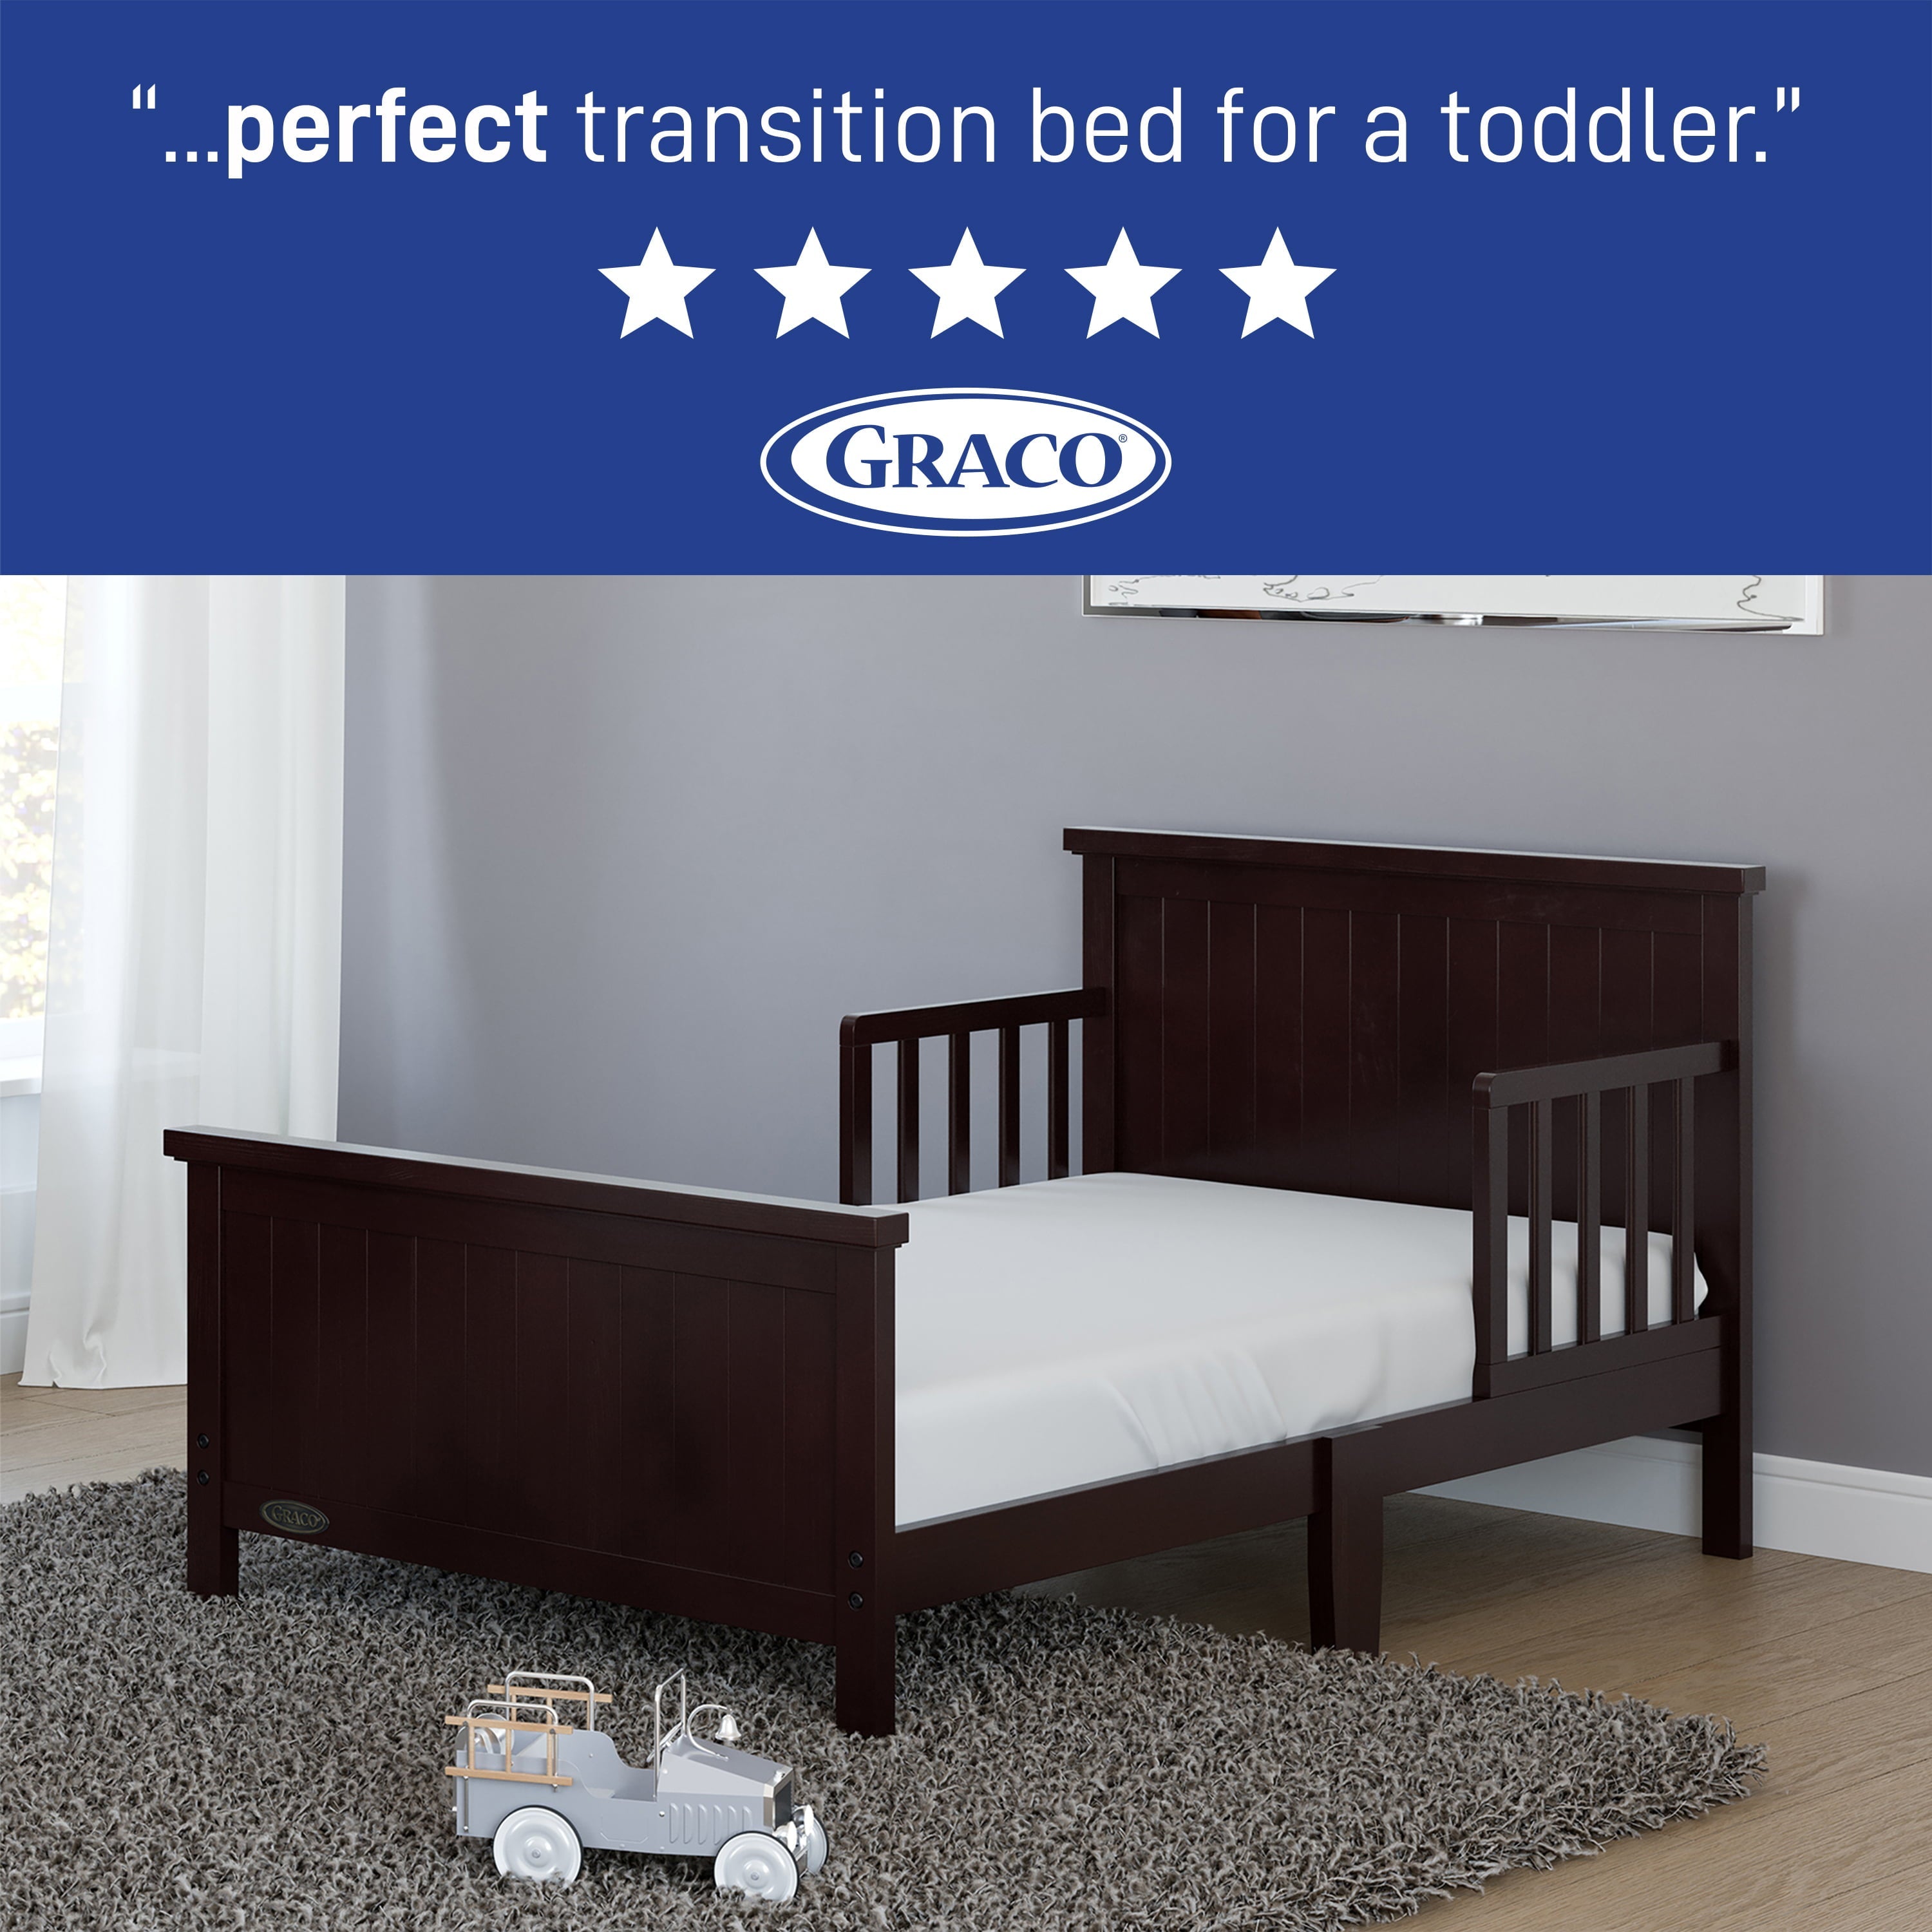 Graco Bailey Wood Single Toddler Kids Bed, Guardrails Included Espresso